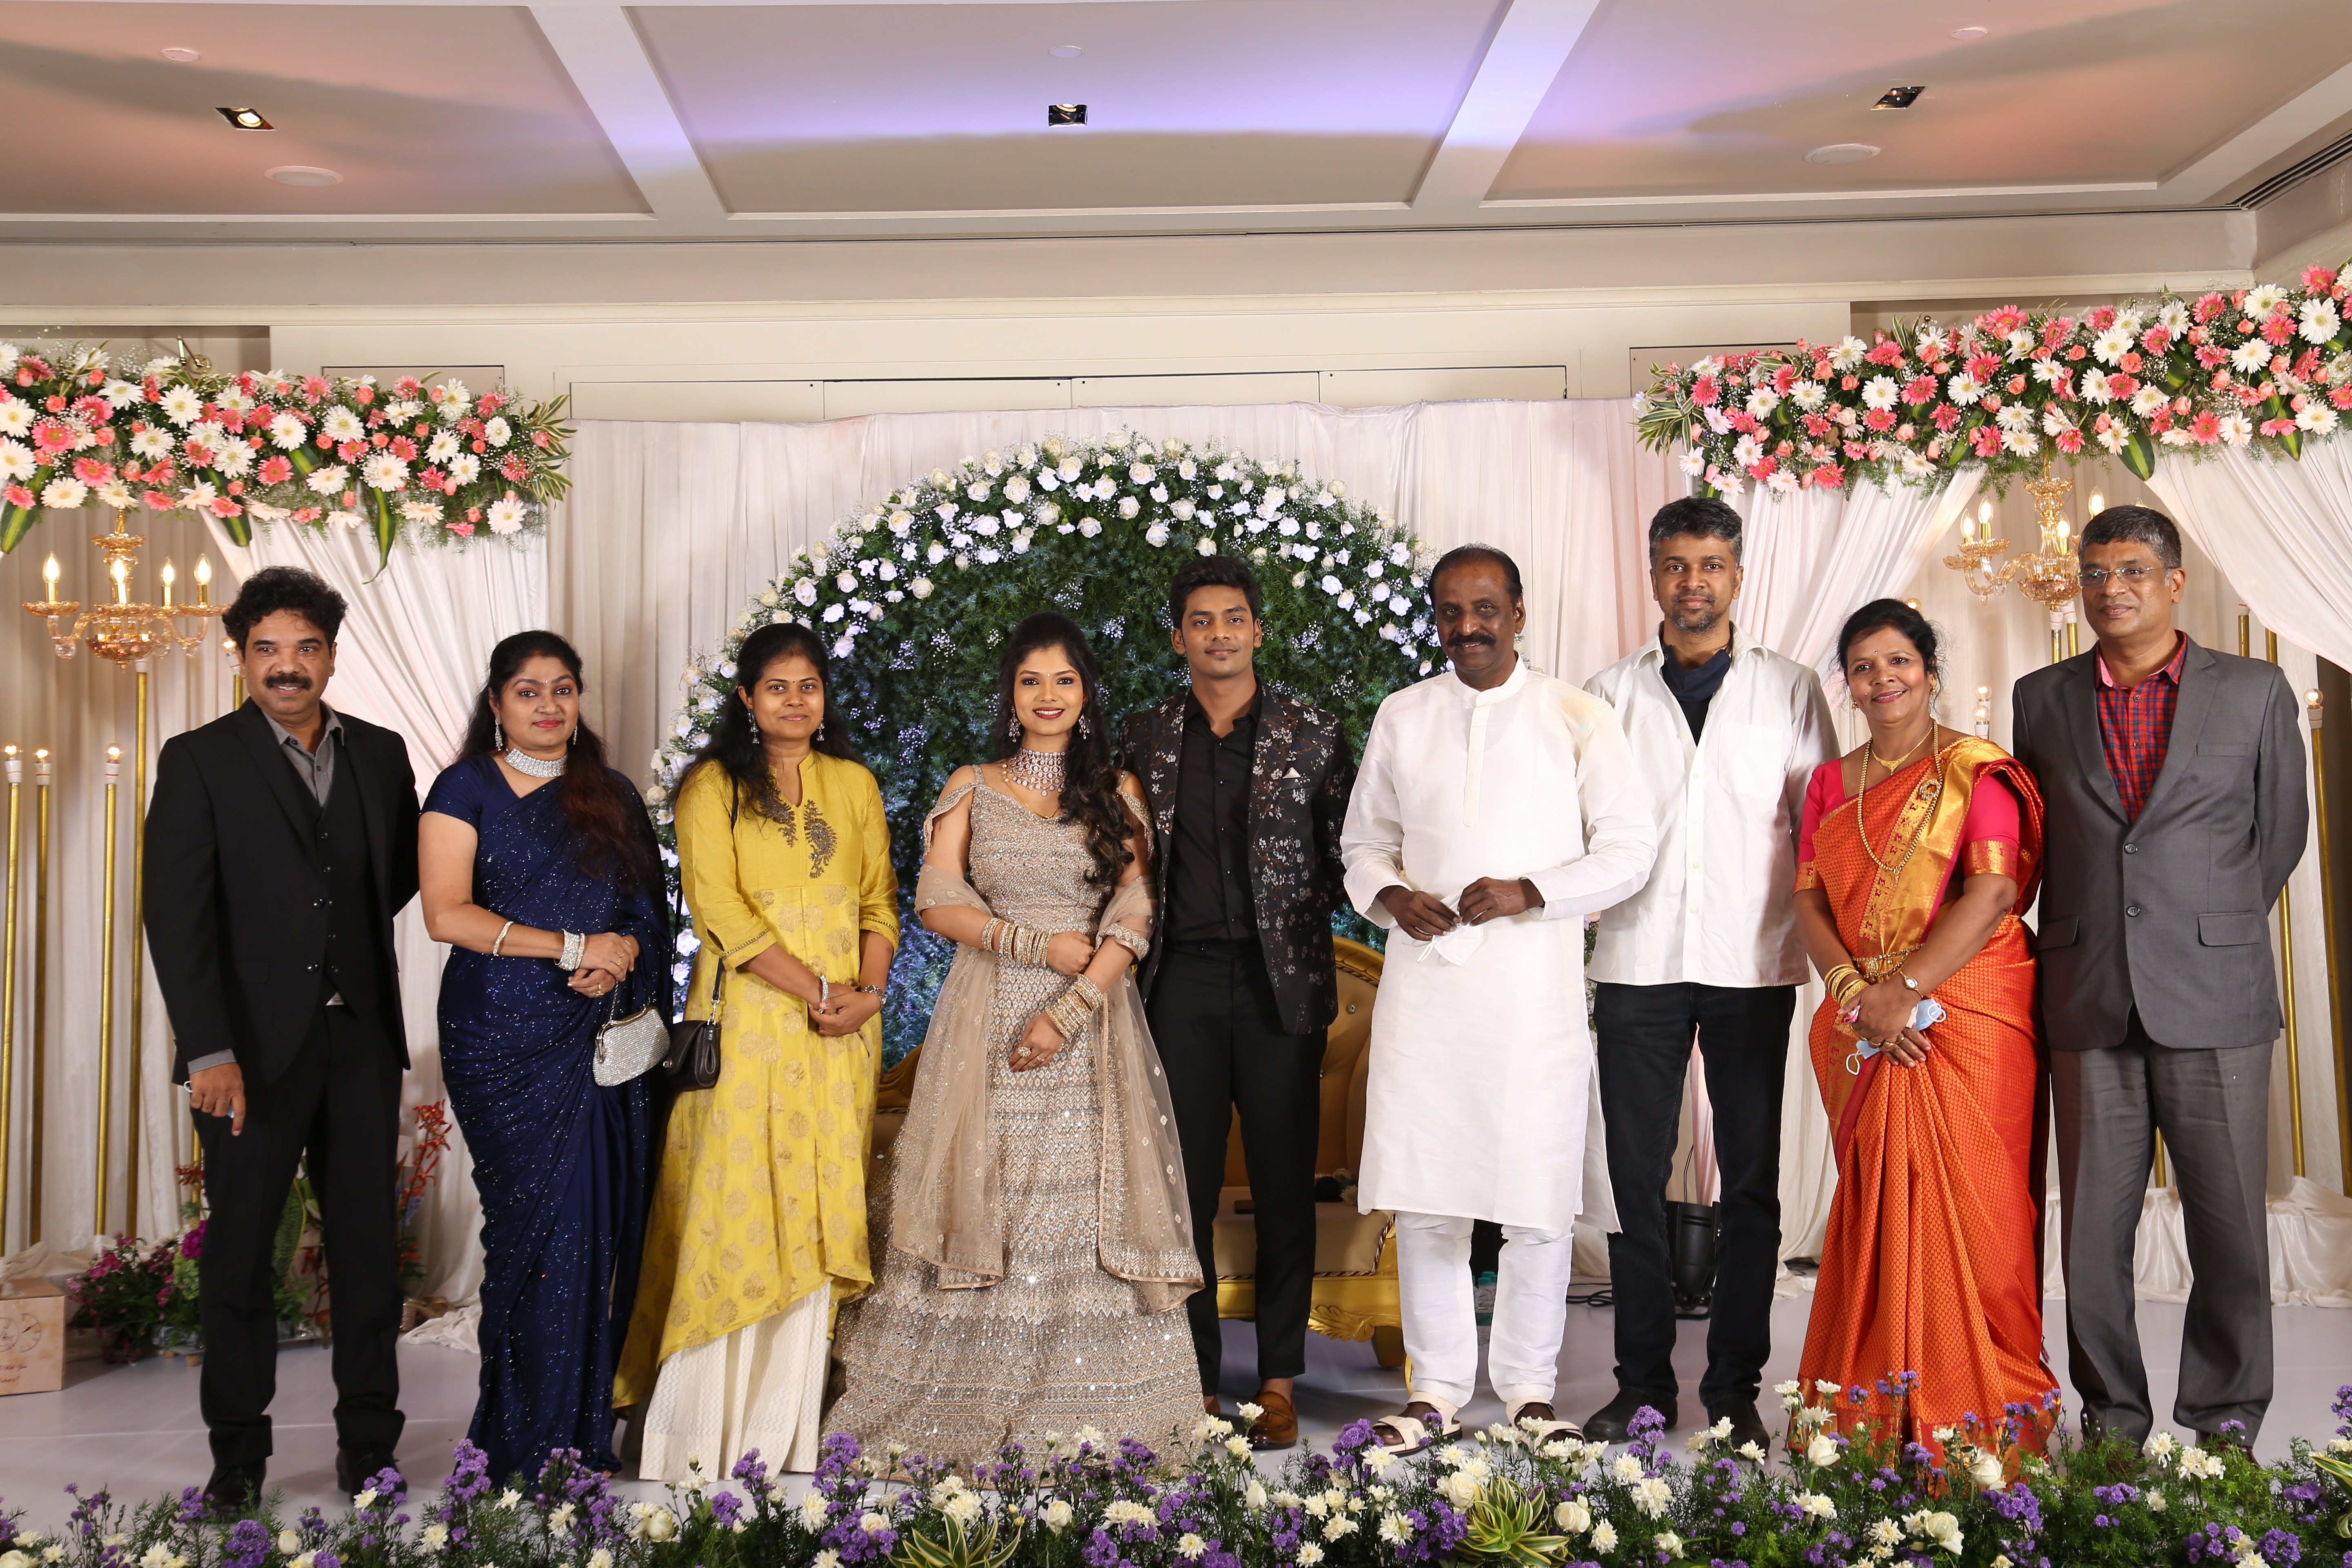 Chief Minister attended the wedding of the young music composer